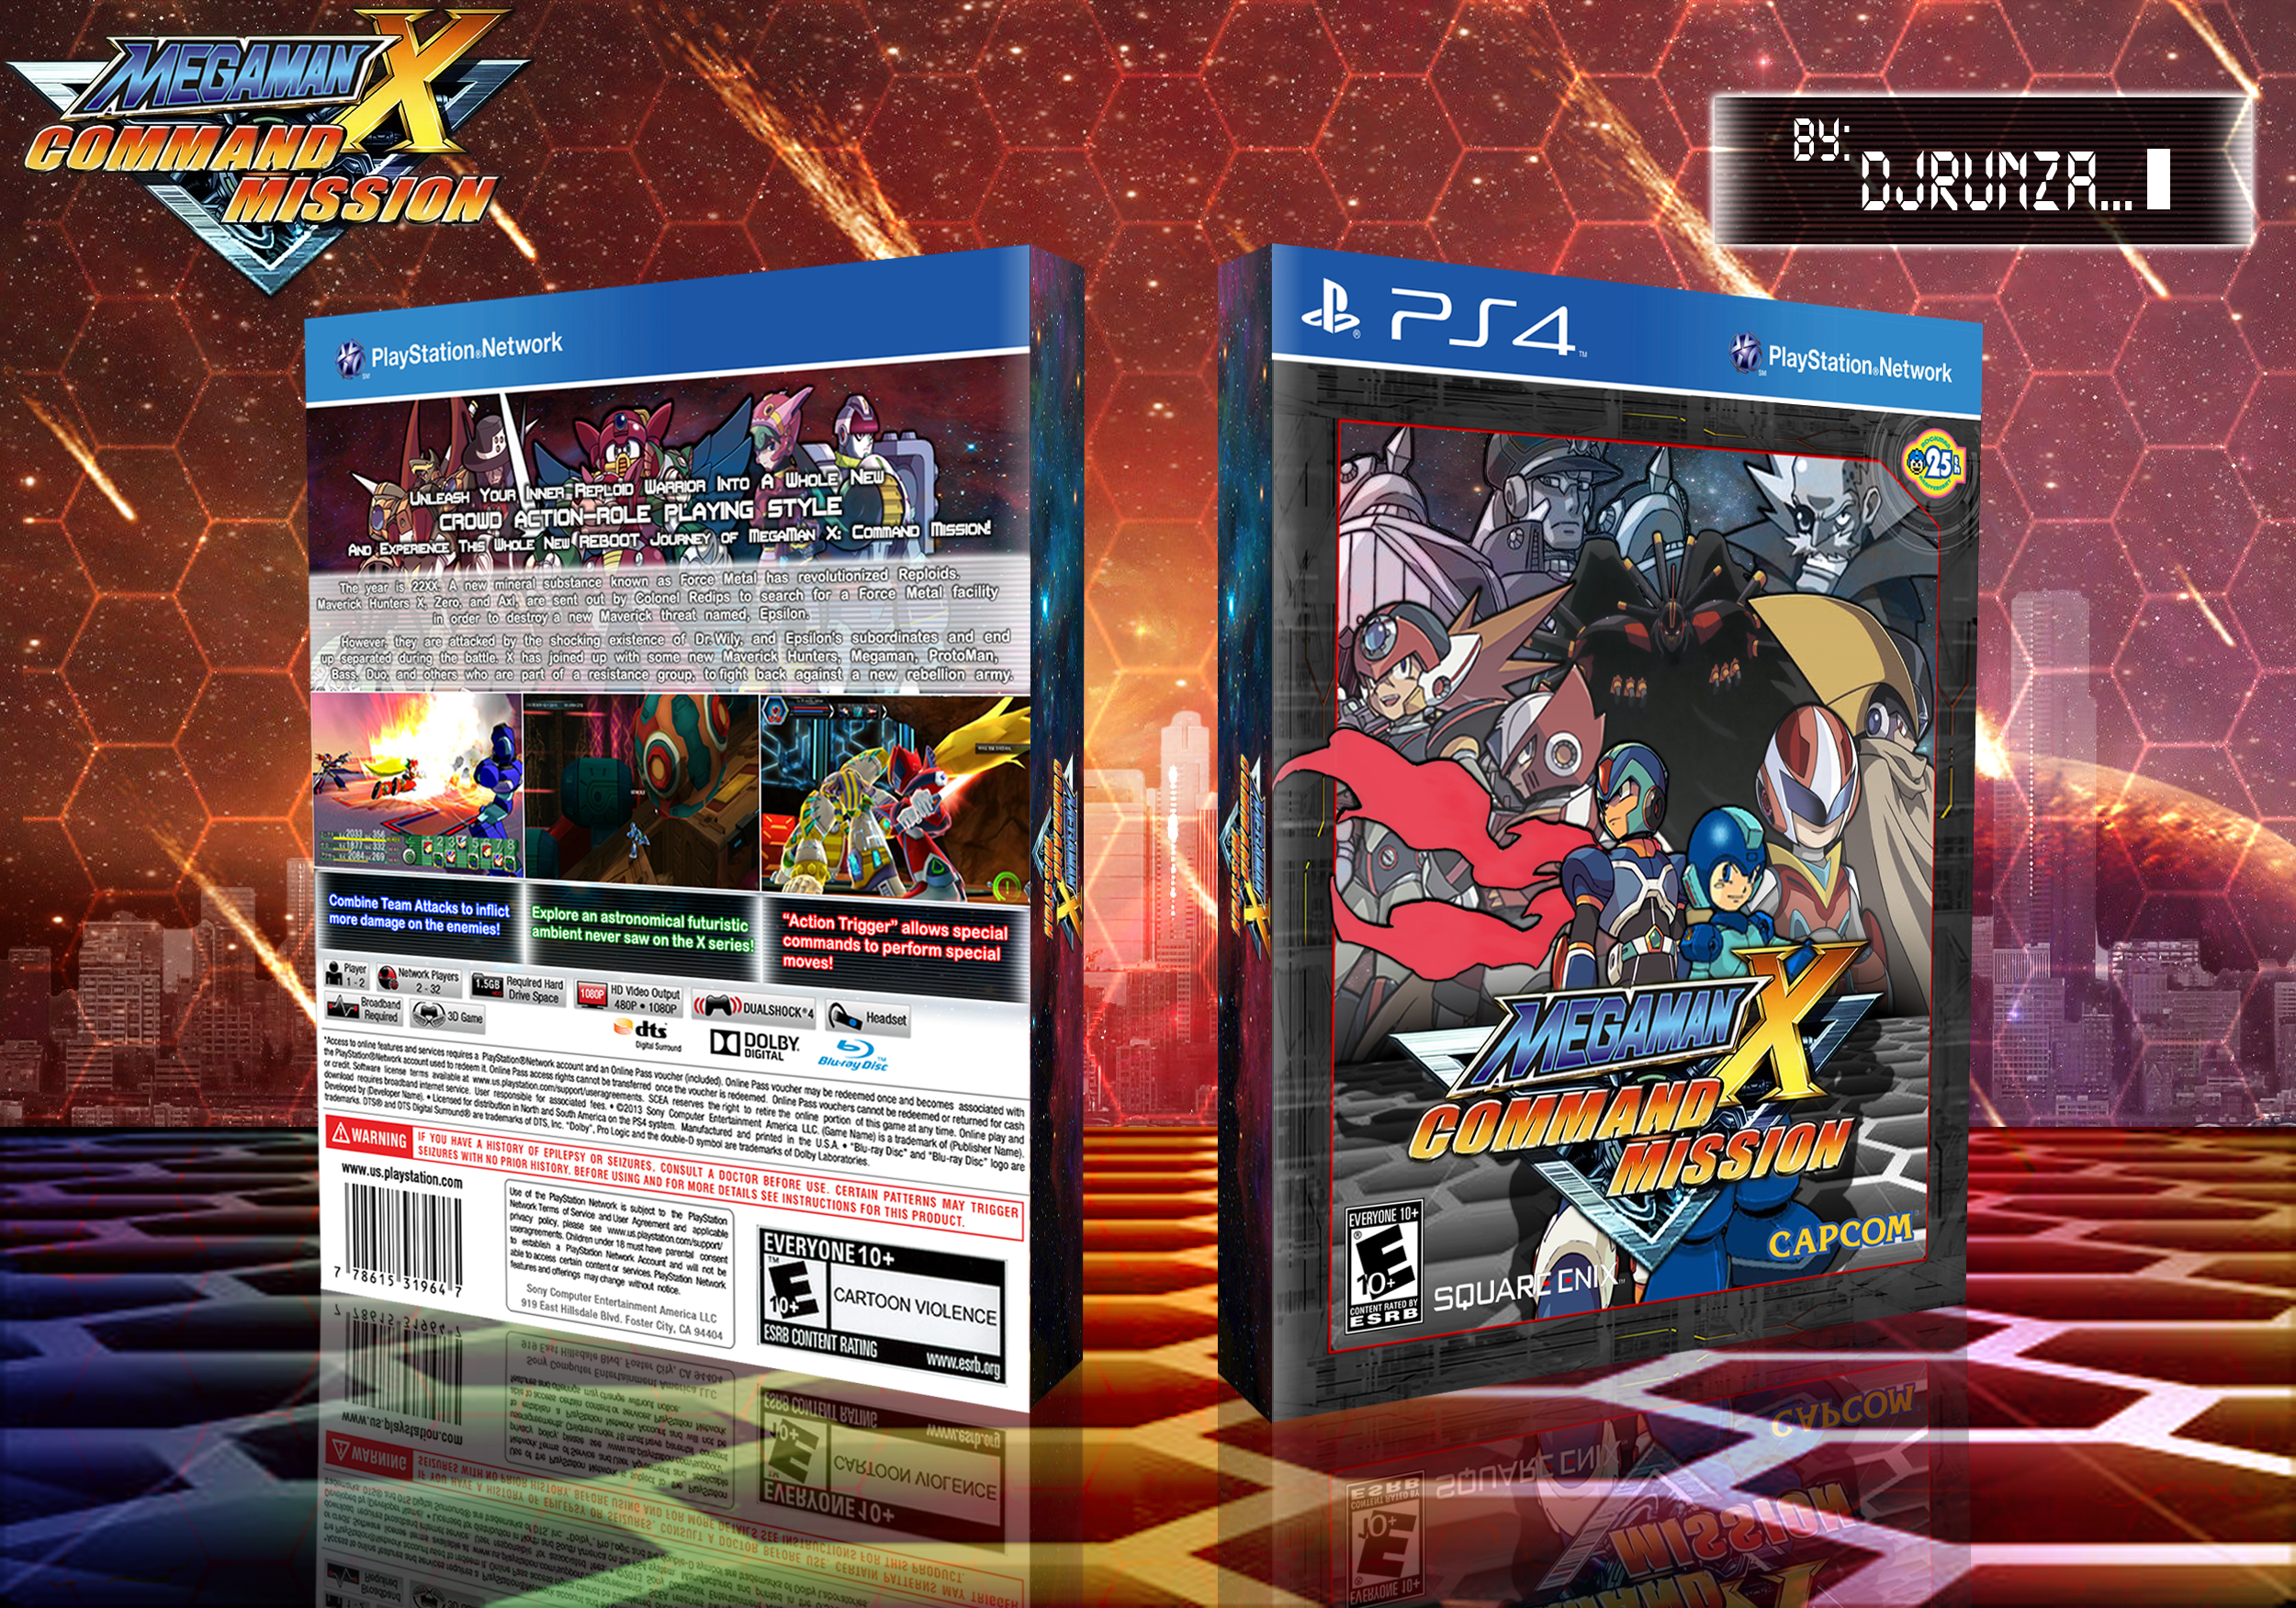 Download Game Megaman X Command Mission Pc